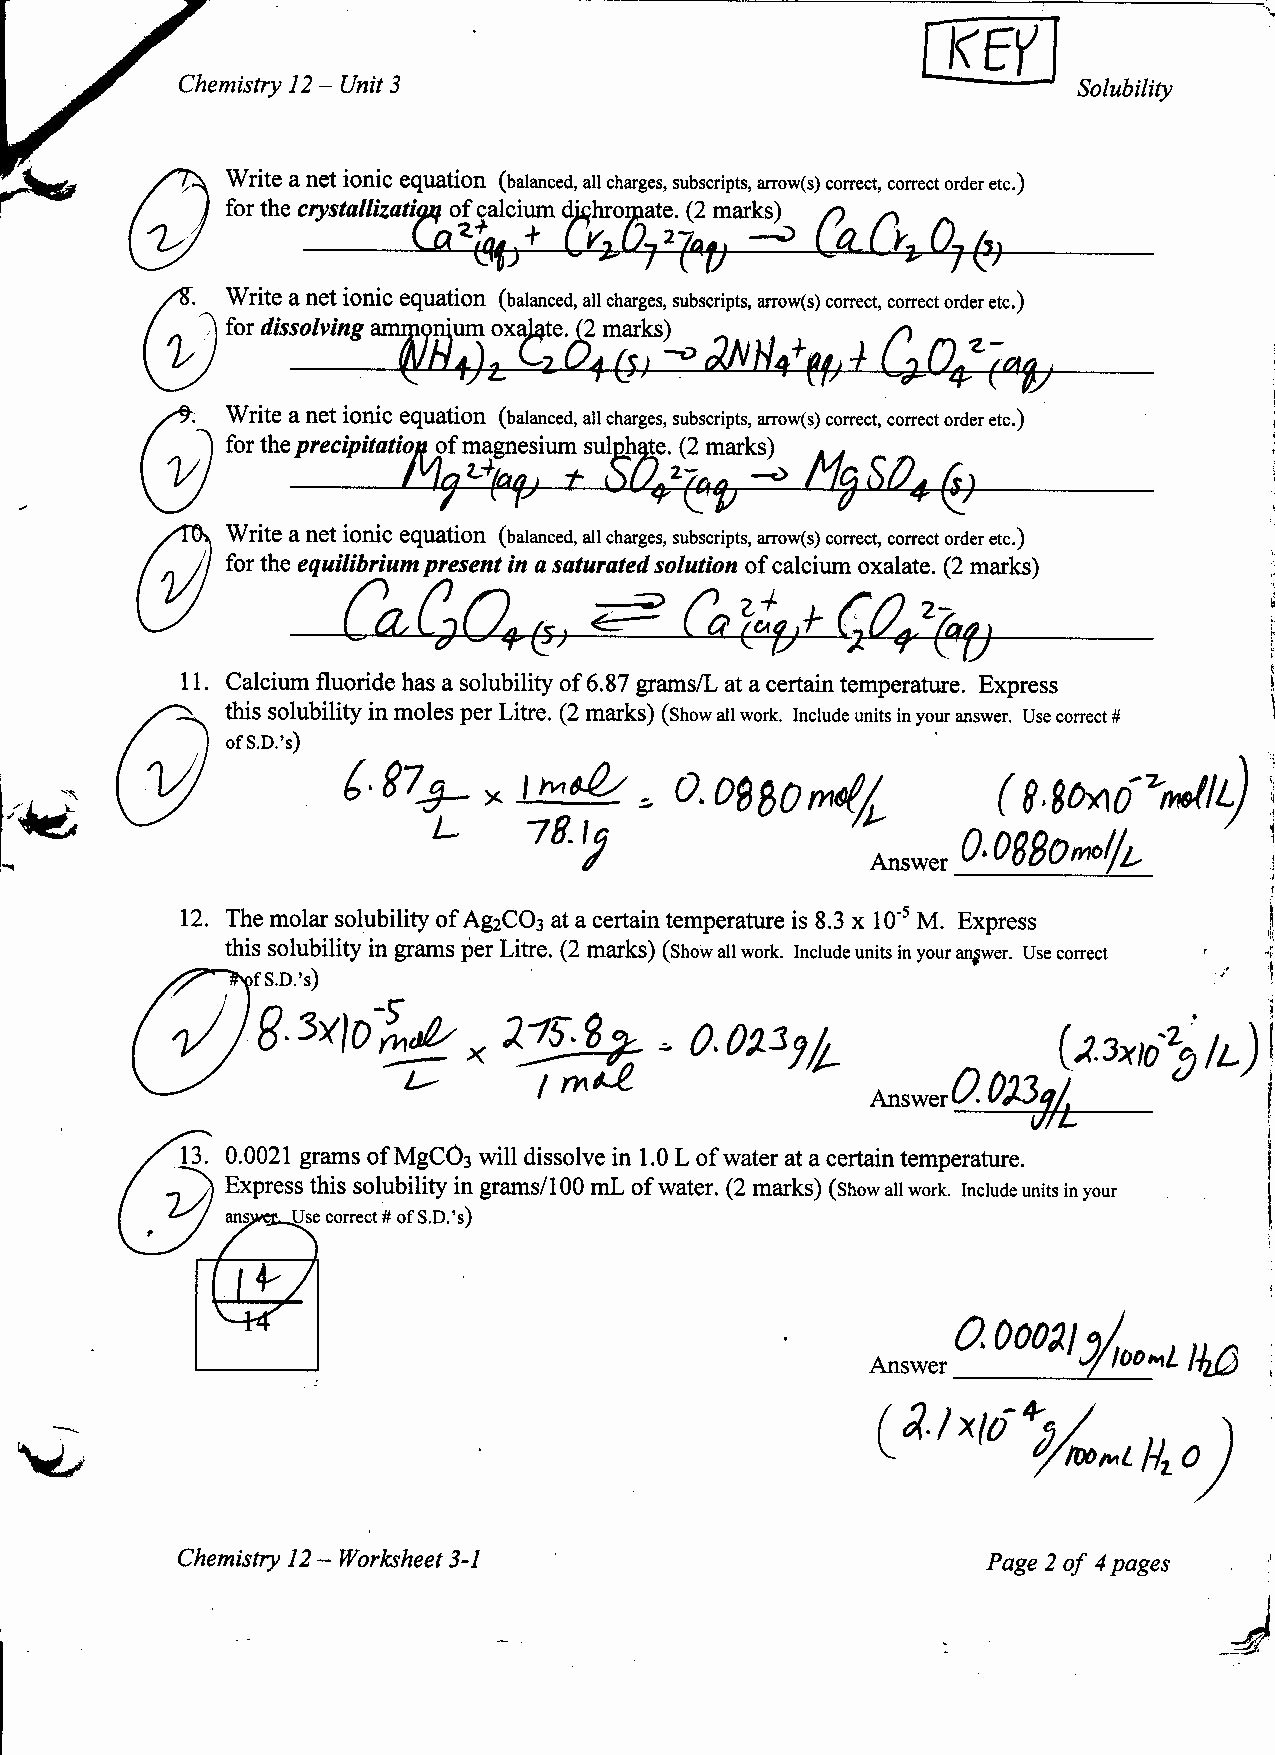 Dimensional Analysis Worksheet Answers Chemistry Best Of Chemistry Unit 1 Worksheet 6 Dimensional Analysis Answer